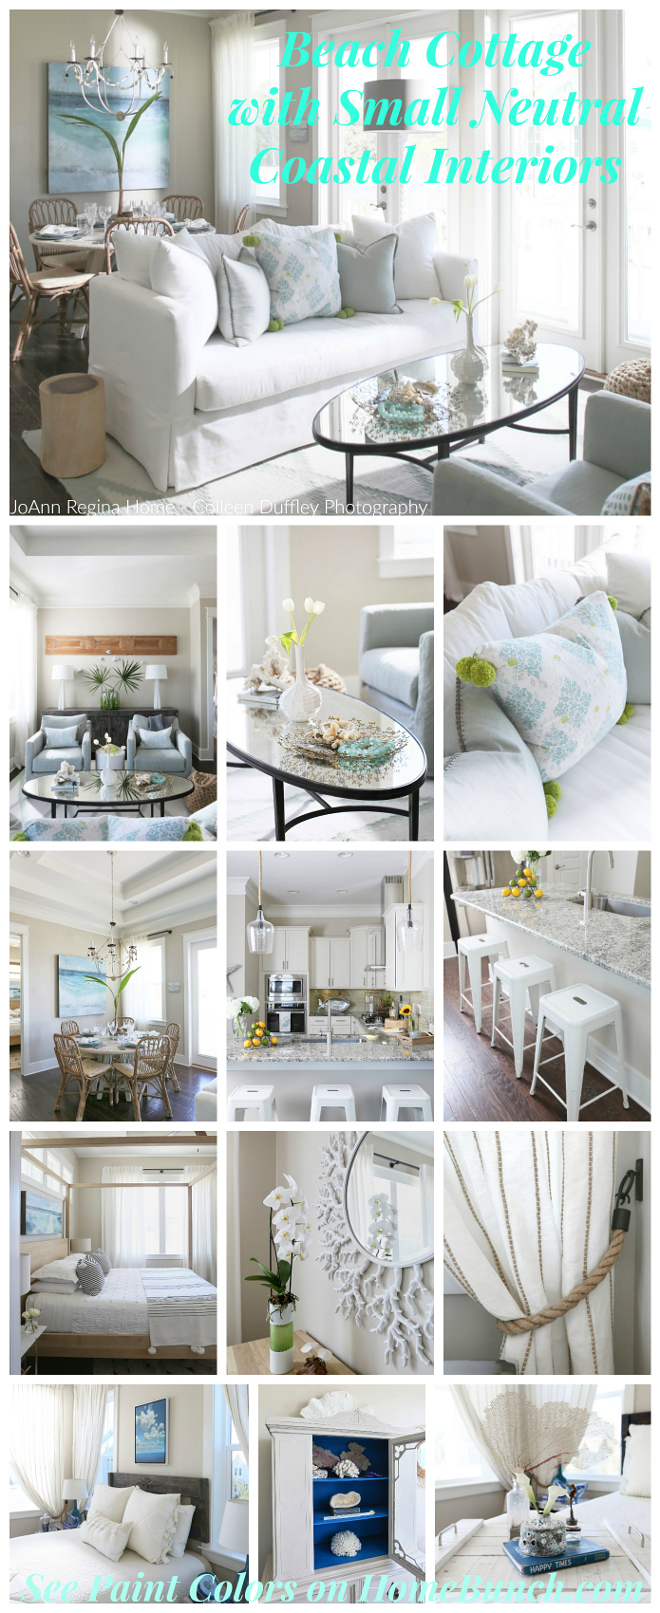 Beach Cottage with Small Neutral Coastal Interiors. Beautiful Beach Cottage with Small Neutral Coastal Interiors w/ interior designer tips. #BeachCottage #Smallinteriors #NeutralCoastalInteriors #NeutralInteriors #CoastalInteriors Home Bunch